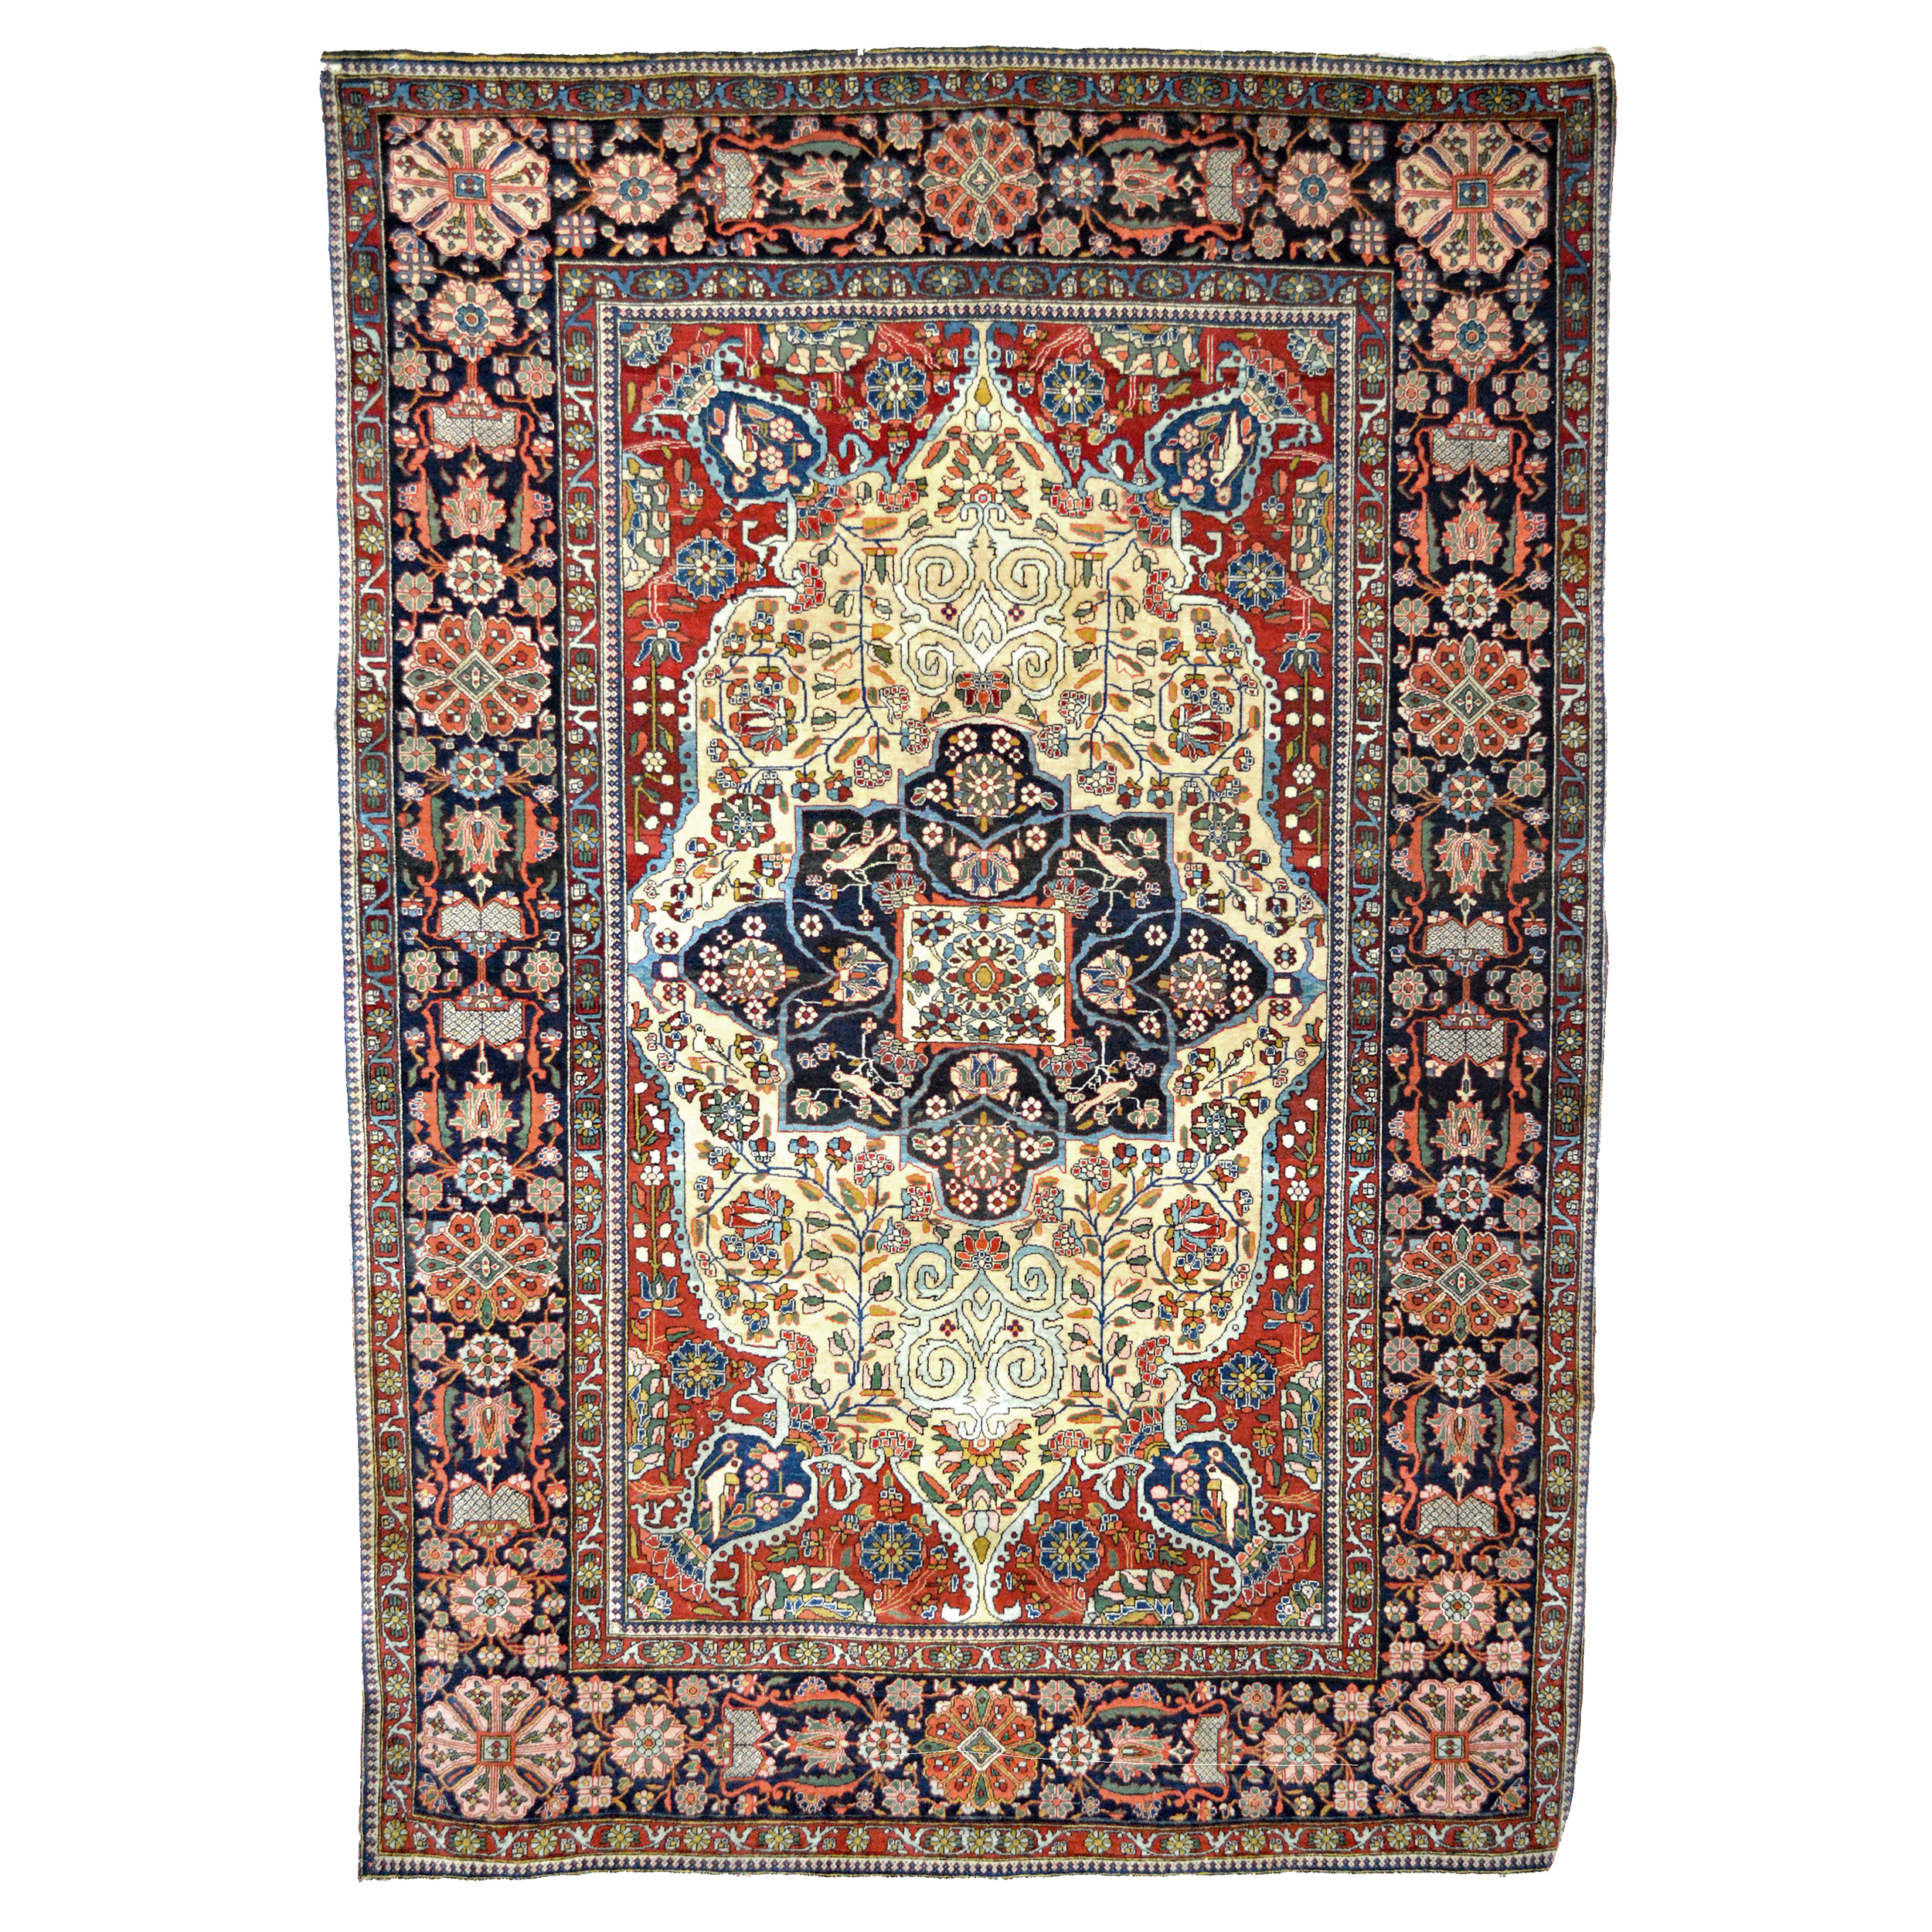 A world class antique Persian Mohtasham Kashan rug with a navy blue medallion on a cream color field that is framed by brick red corner spandrels and a navy blue border. The rug is decorated with floral elements, birds and vases. Douglas Stock Gallery specializes in antique Mohtasham Kashan rugs, antique Persian rugs Boston,MA area, antique Oriental rugs New England